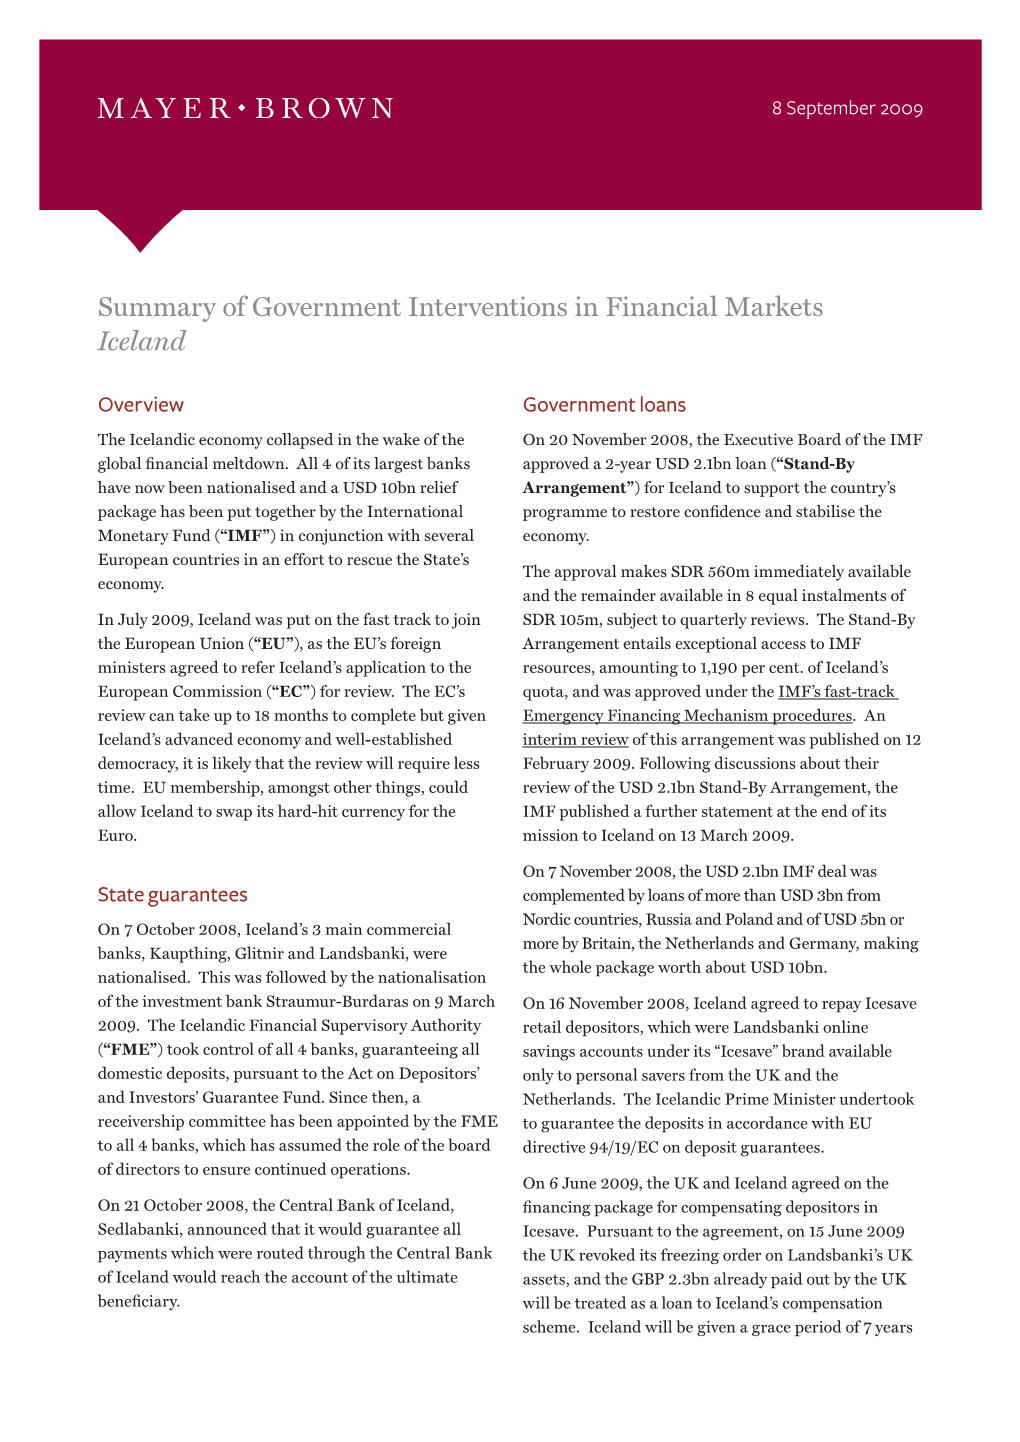 Summary of Government Interventions in Financial Markets Iceland